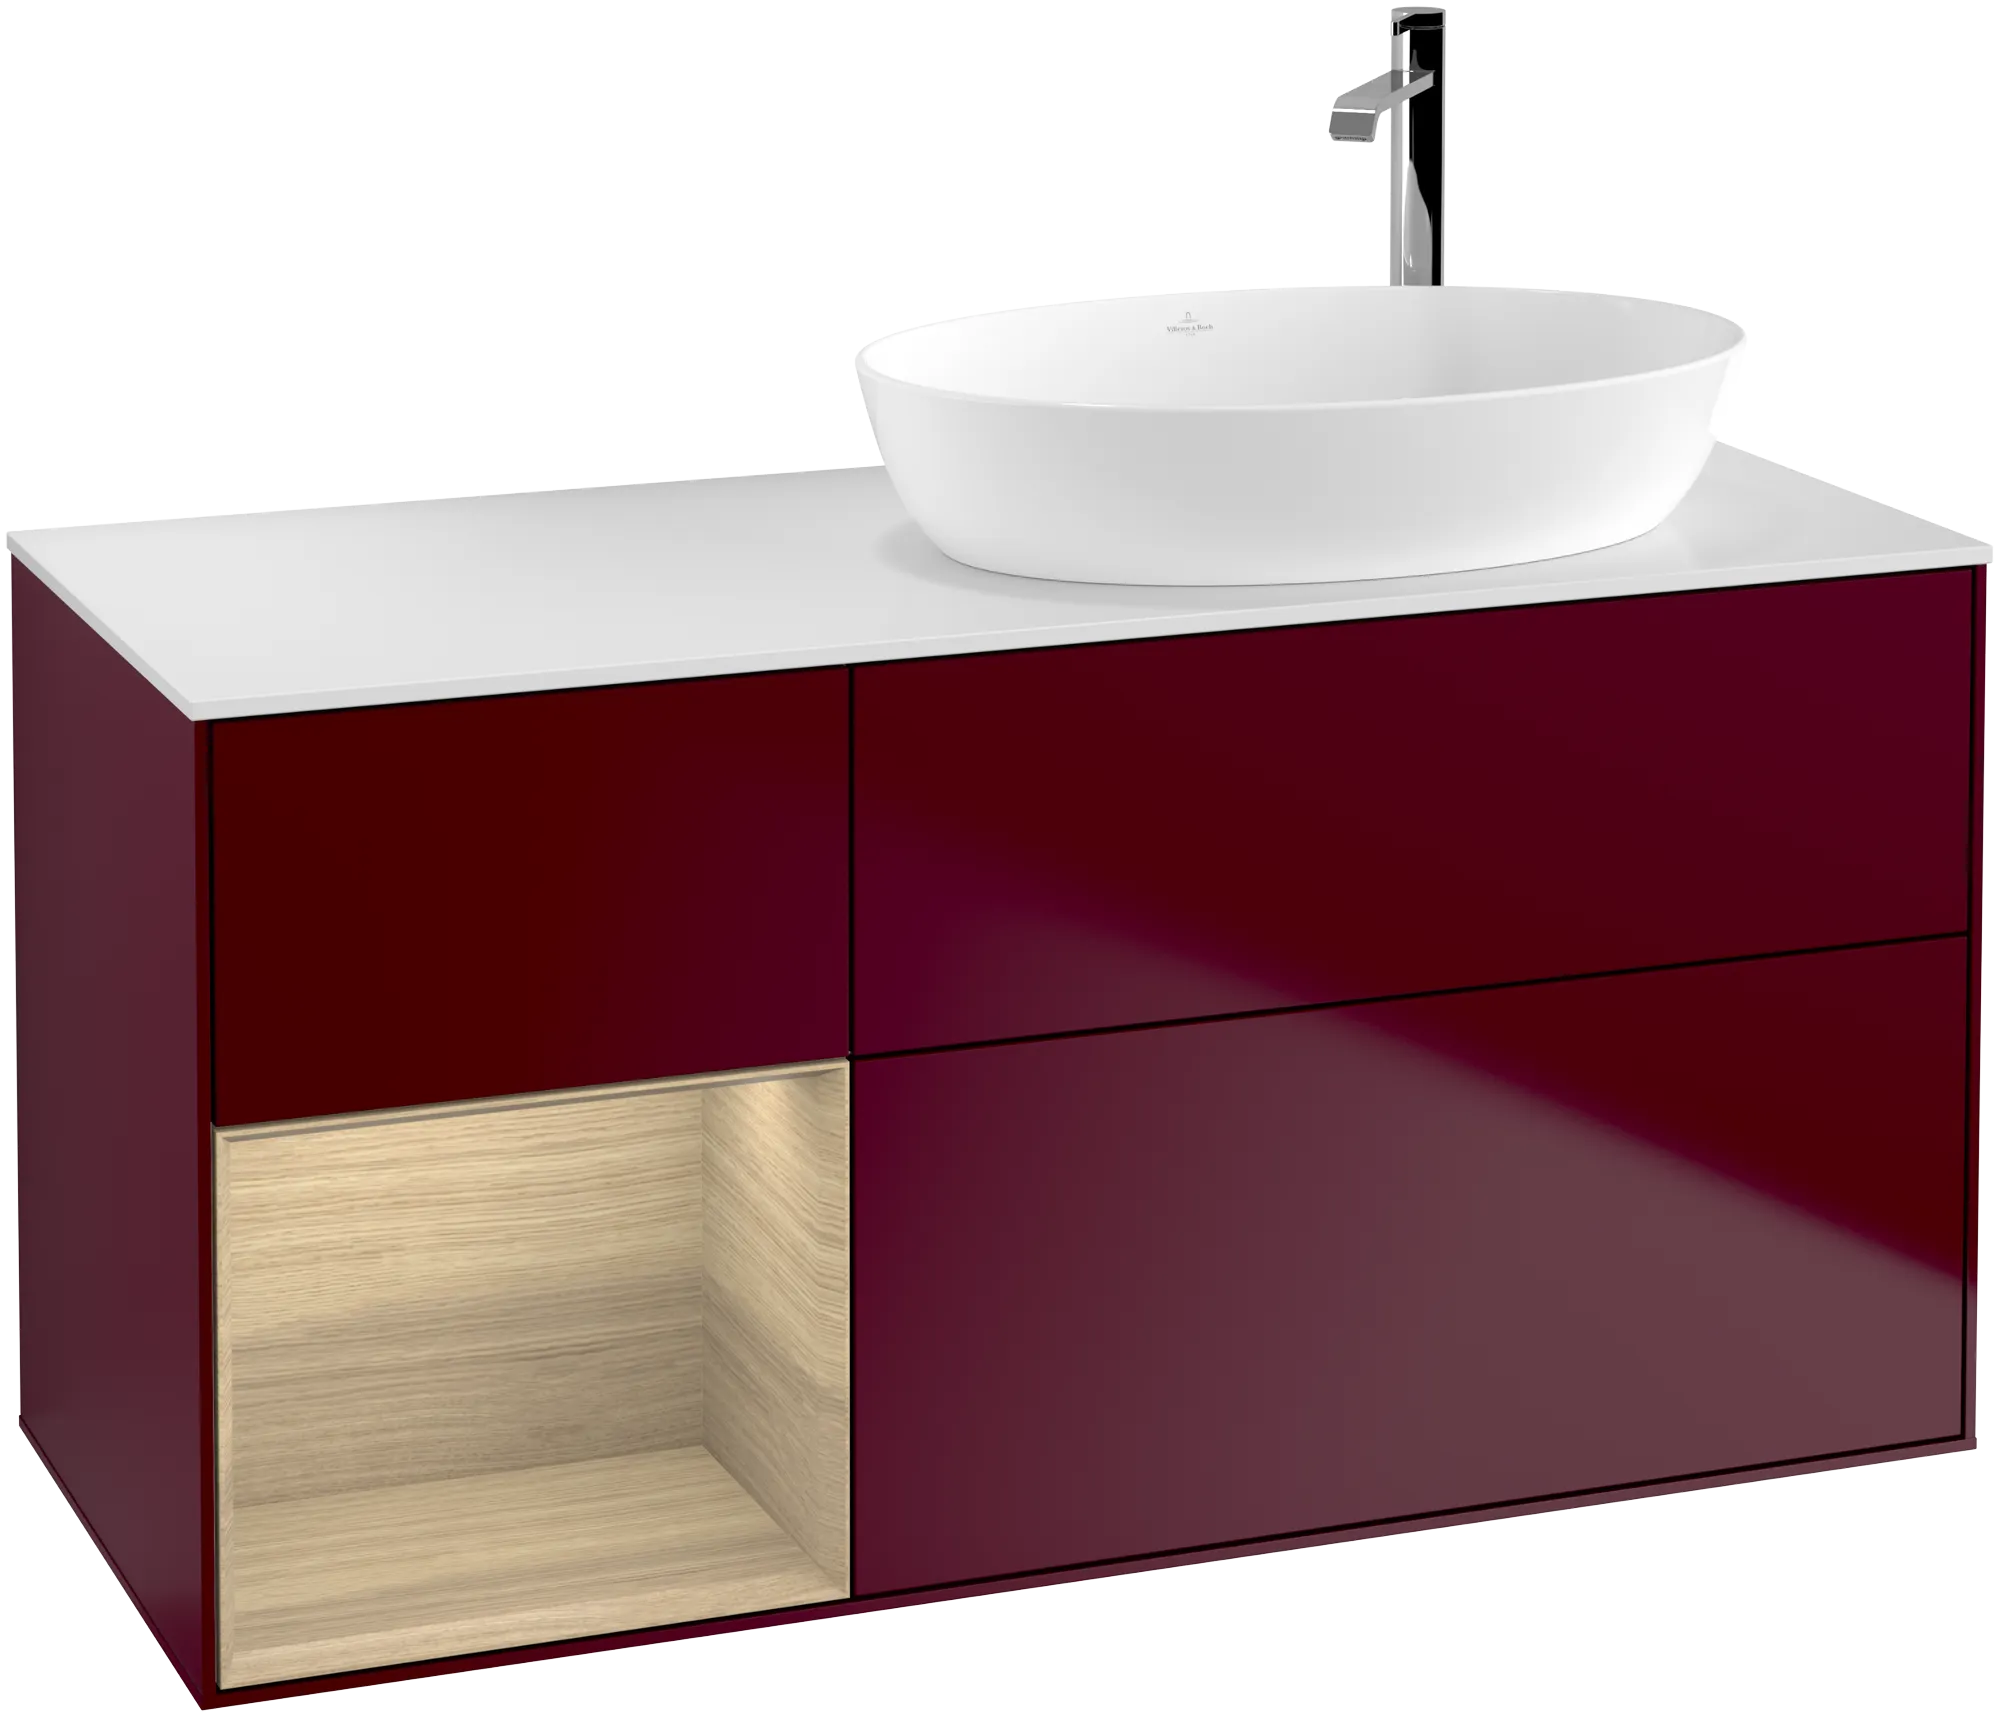 Picture of VILLEROY BOCH Finion Vanity unit, with lighting, 3 pull-out compartments, 1200 x 603 x 501 mm, Peony Matt Lacquer / Oak Veneer / Glass White Matt #G921PCHB